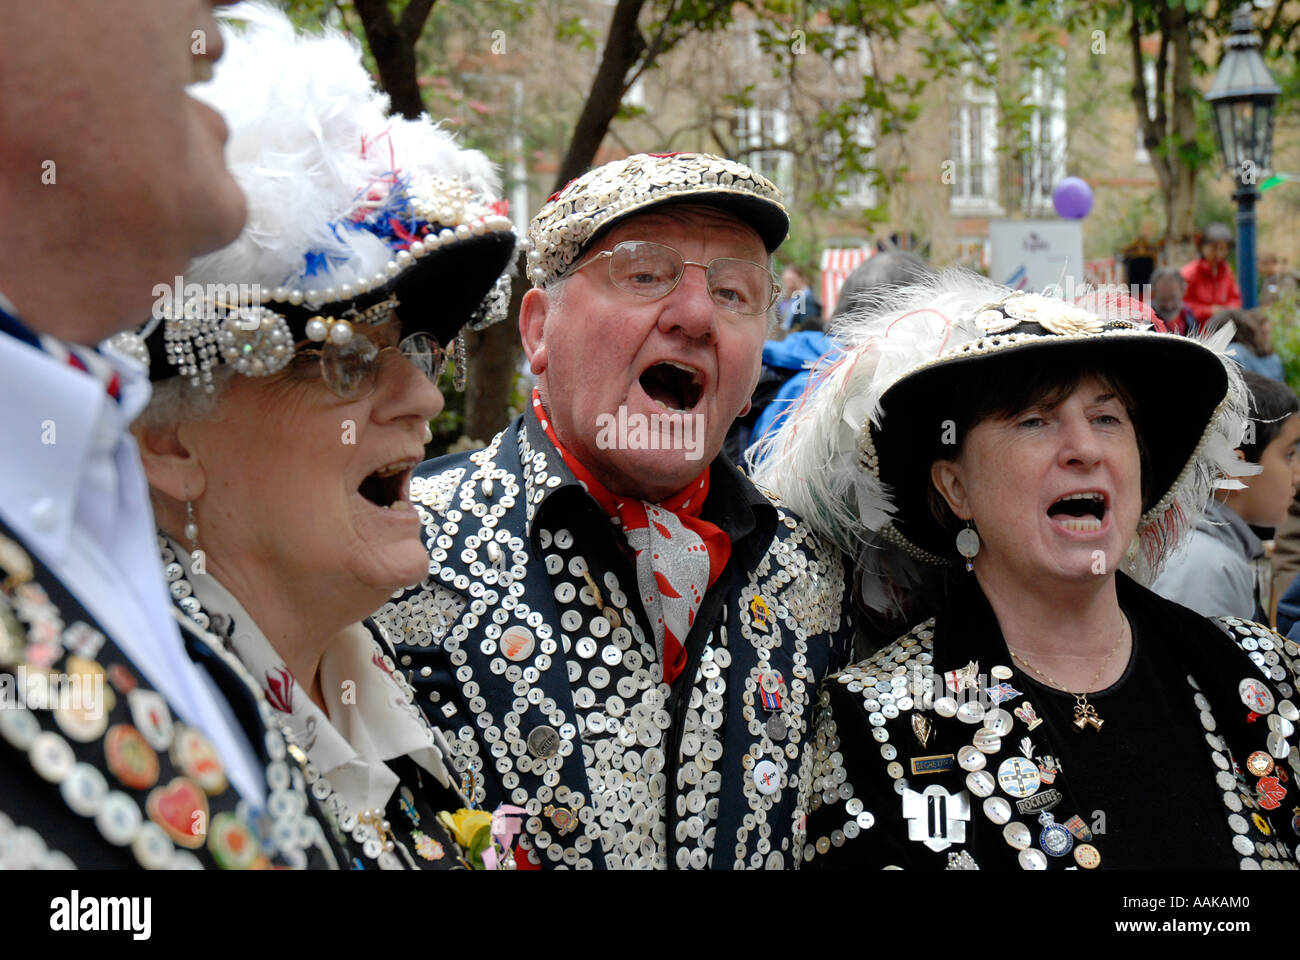 Pearly Kings and Queens in the grounds of St Pauls Church Covent Garden London Stock Photo